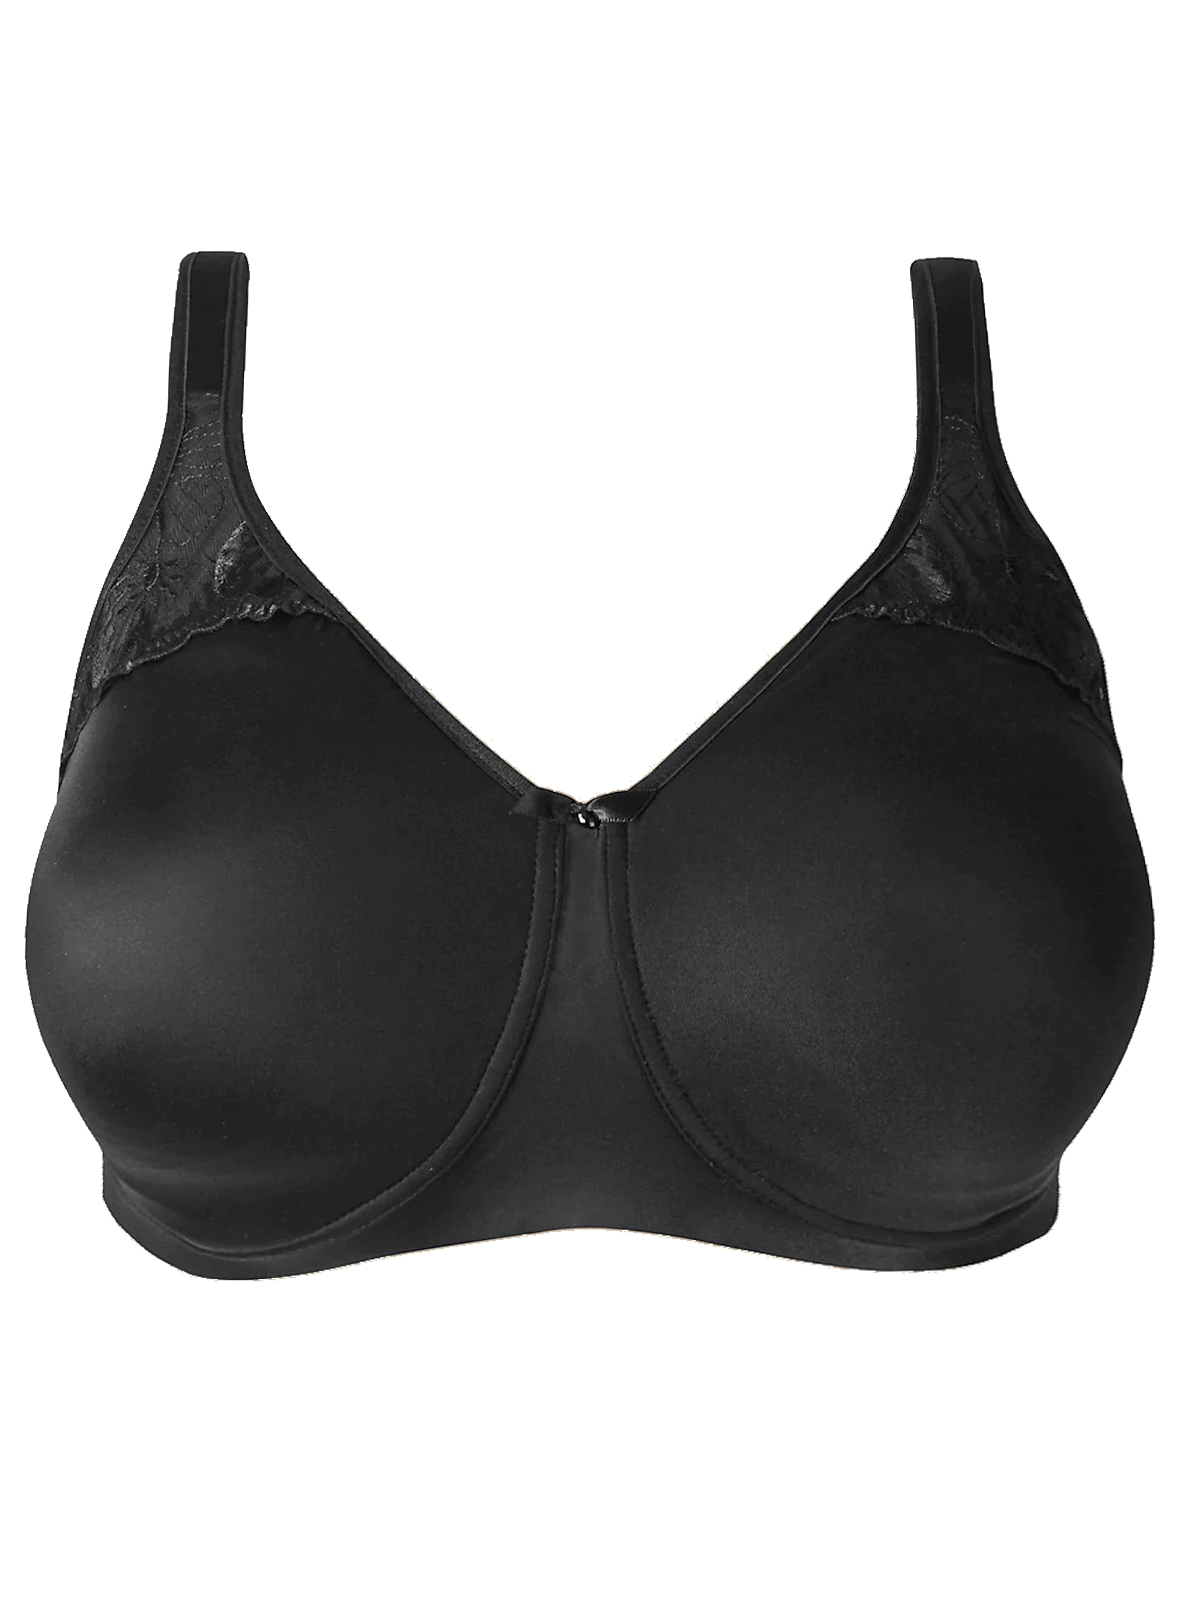 B Cup One Level Push Up Bra. Online Lingerie Shopping in Nepal.